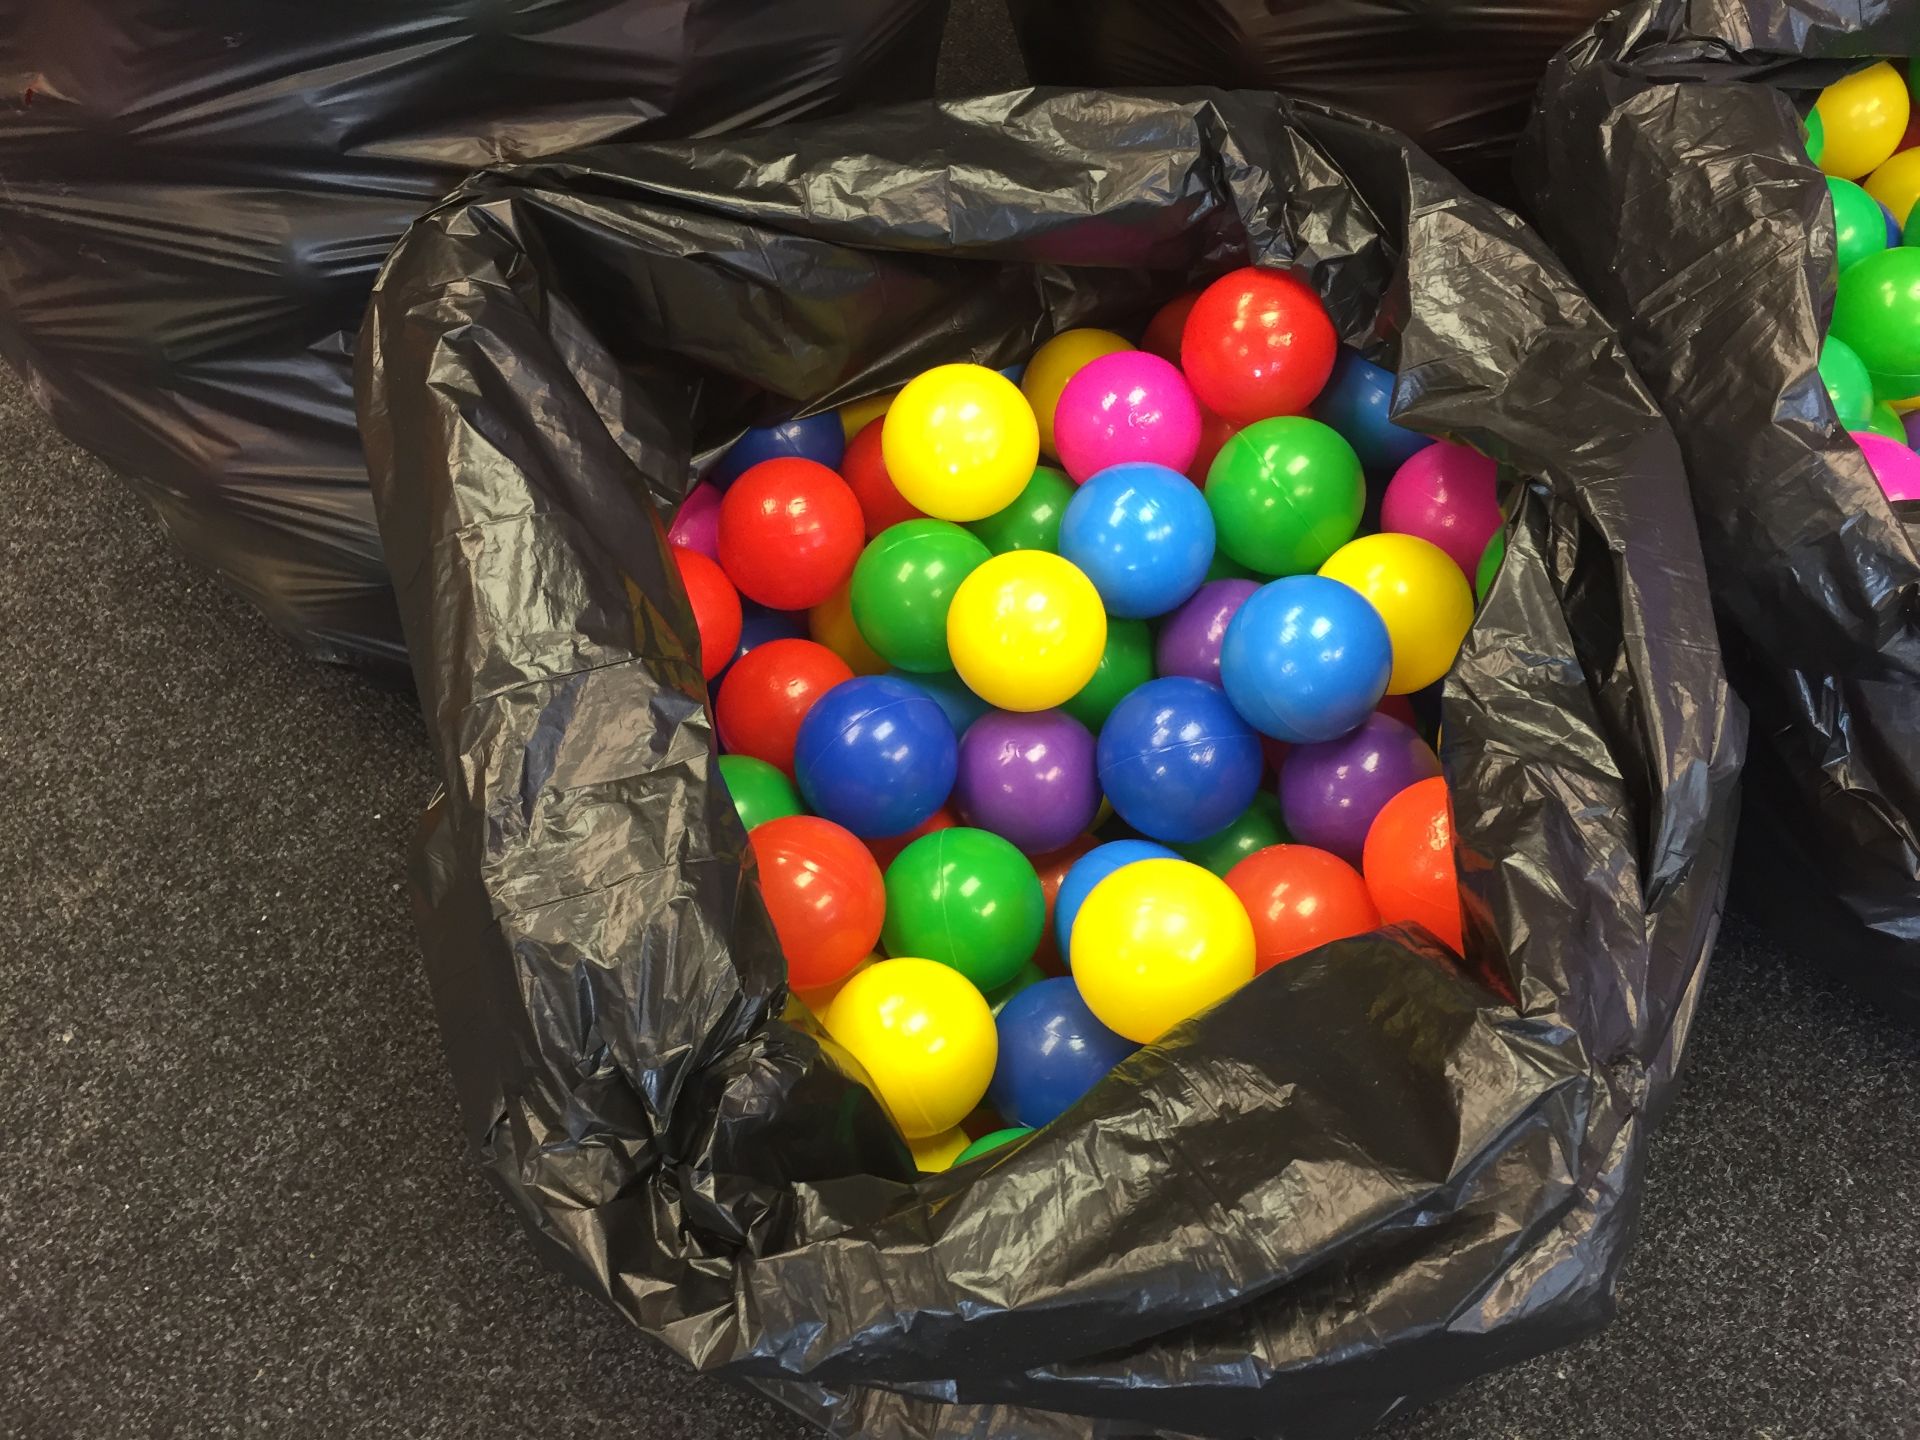 CE Marked Plastic Balls (4 bags) - Image 2 of 2